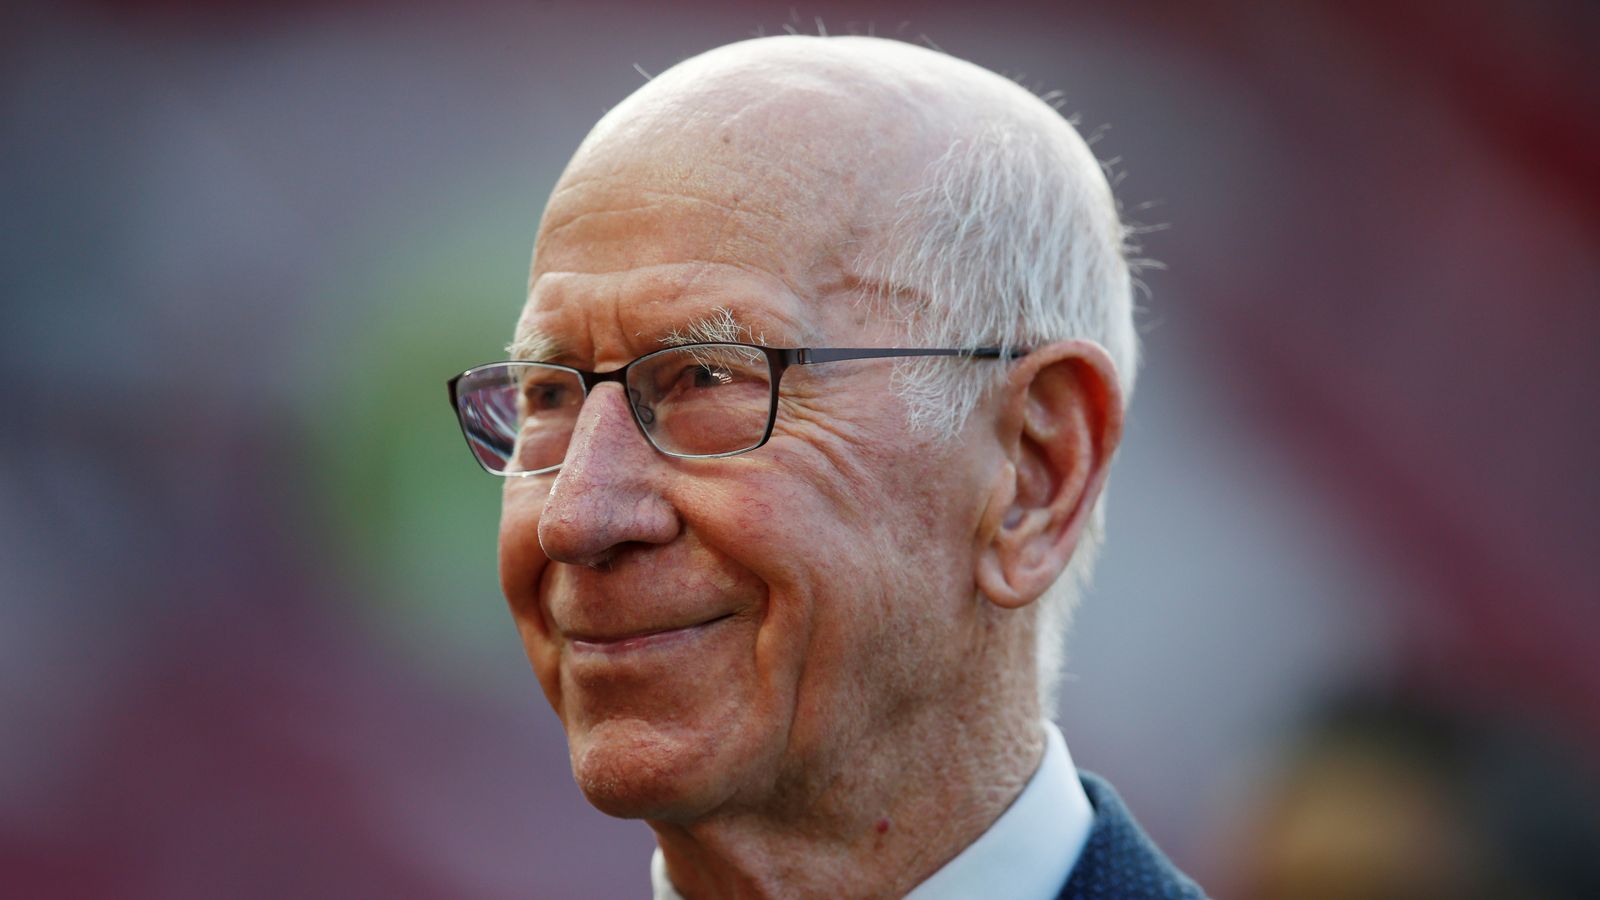 Sir Bobby Charlton obituary: Manchester United and England legend remembered